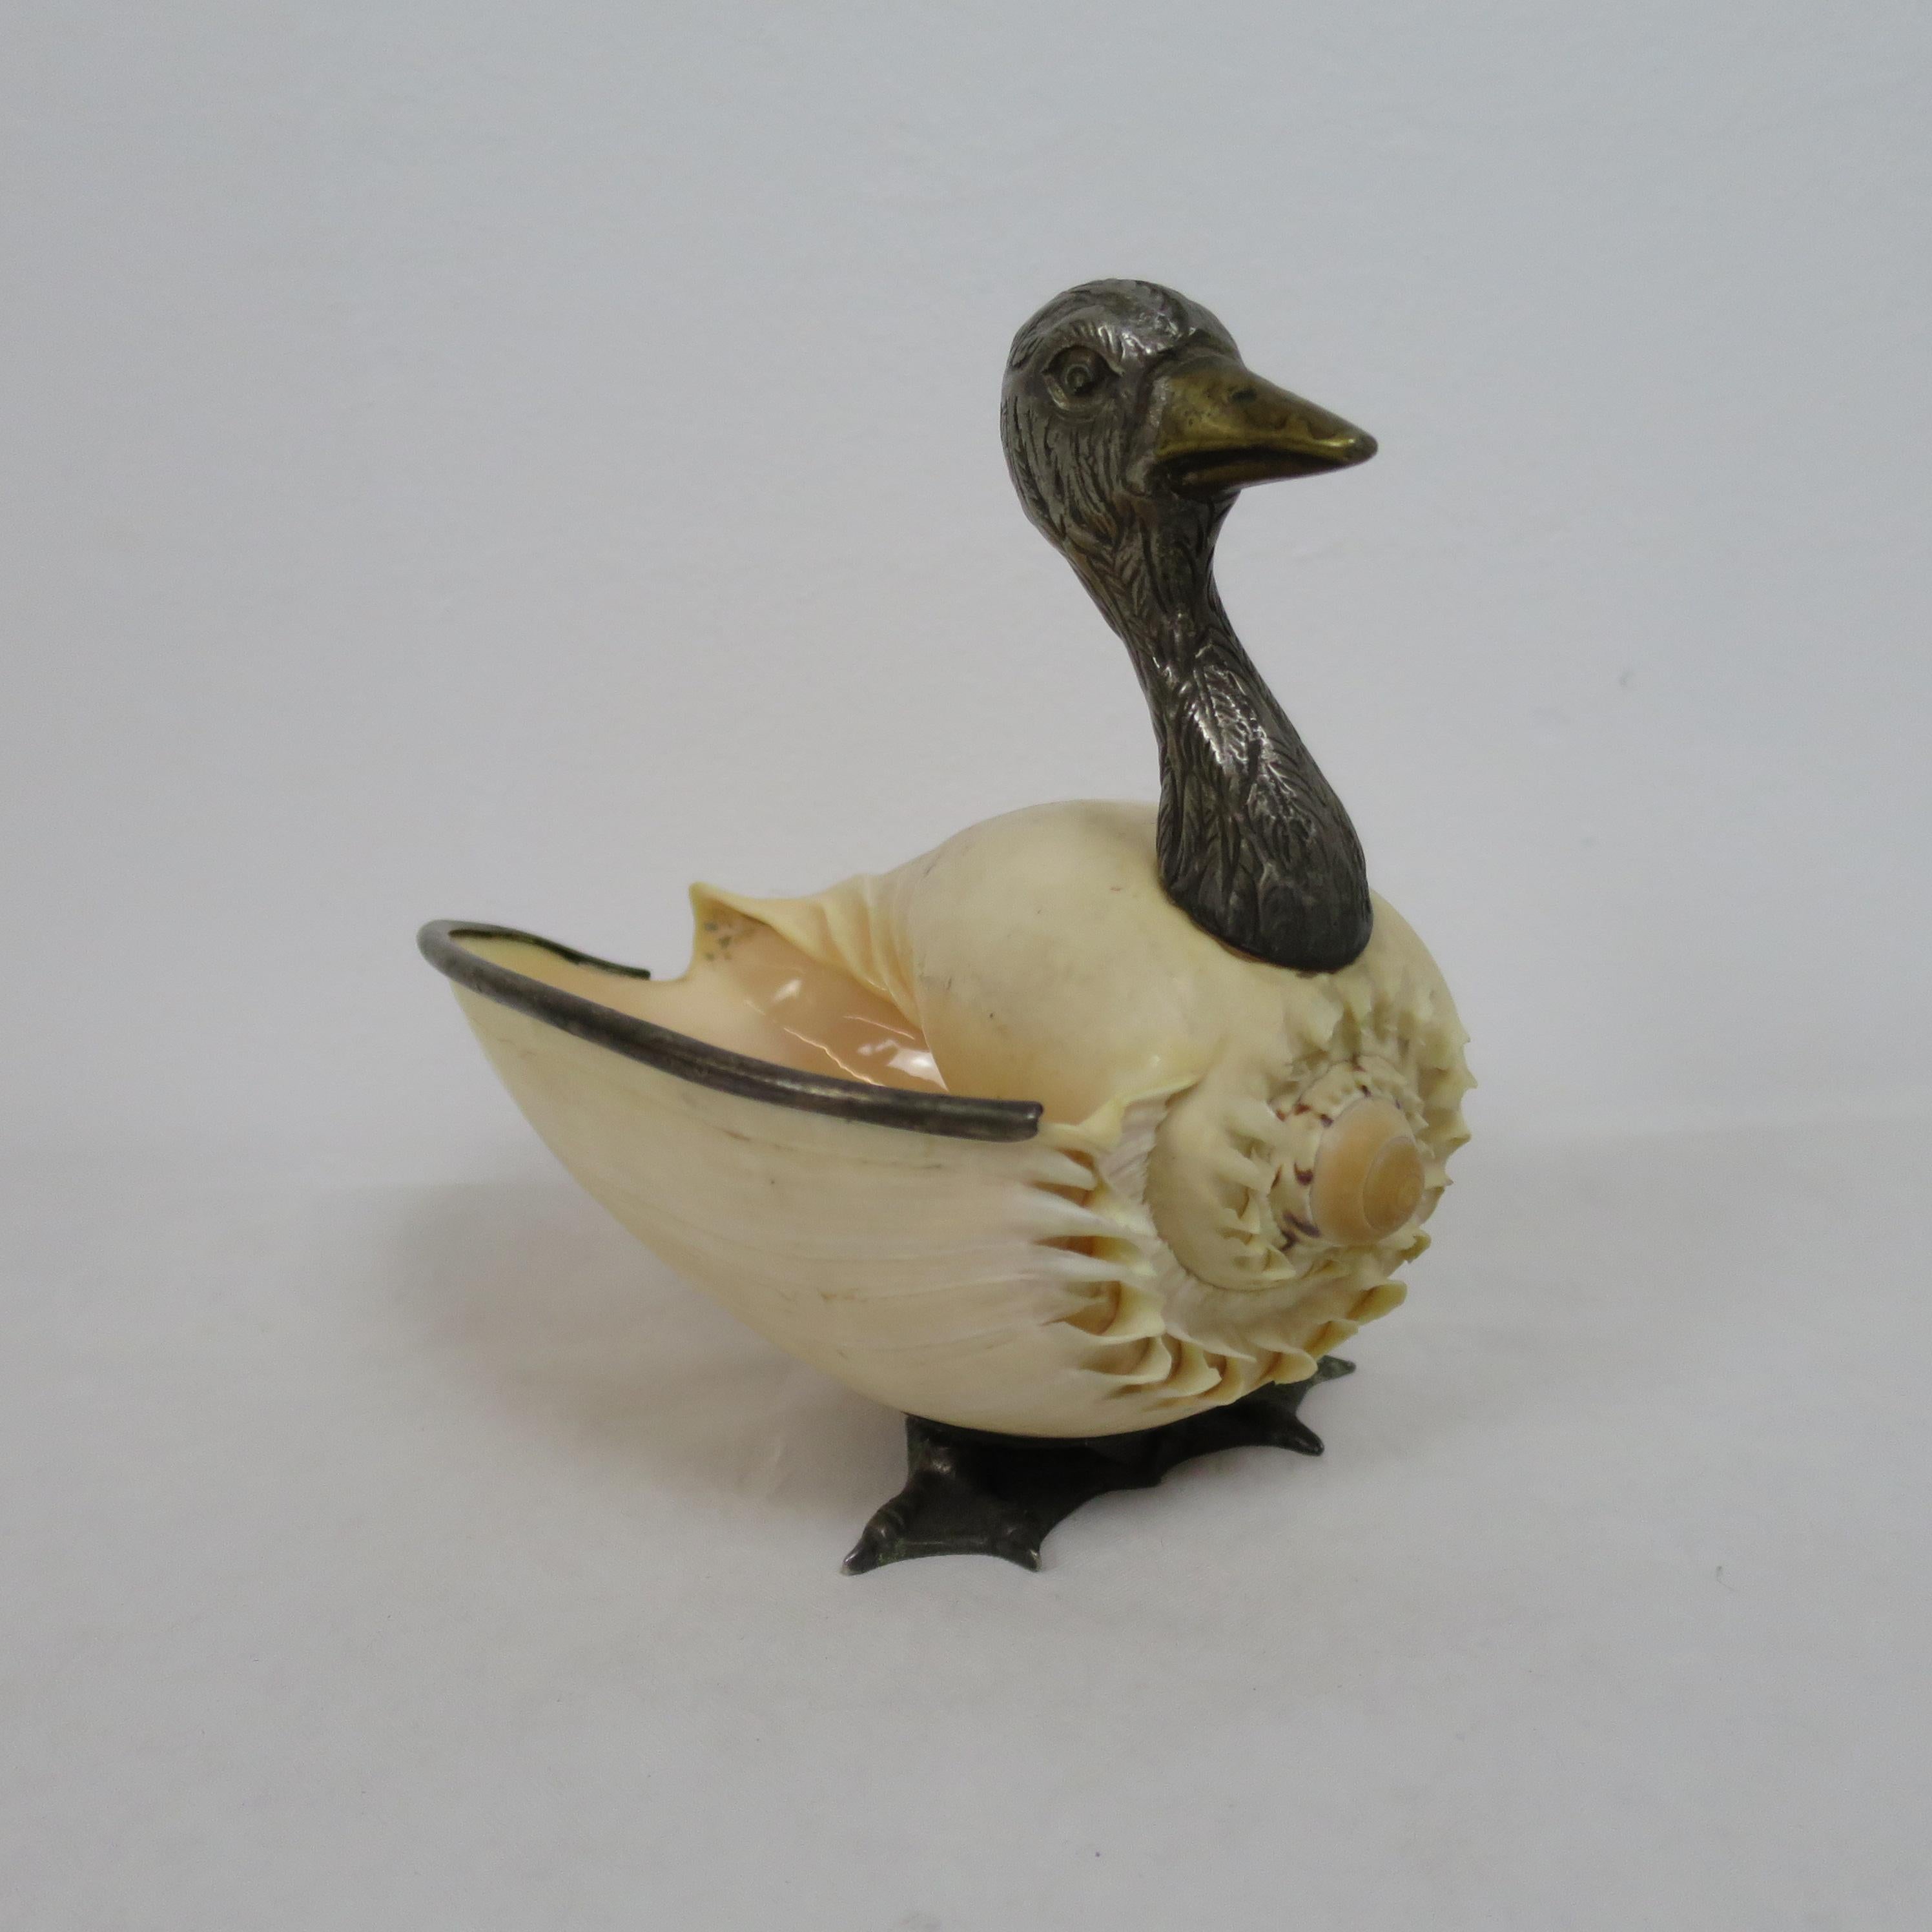 Decorativ object, vide poche, signed by Binazzi in silver and natural shell.
Italian work, circa 1970.